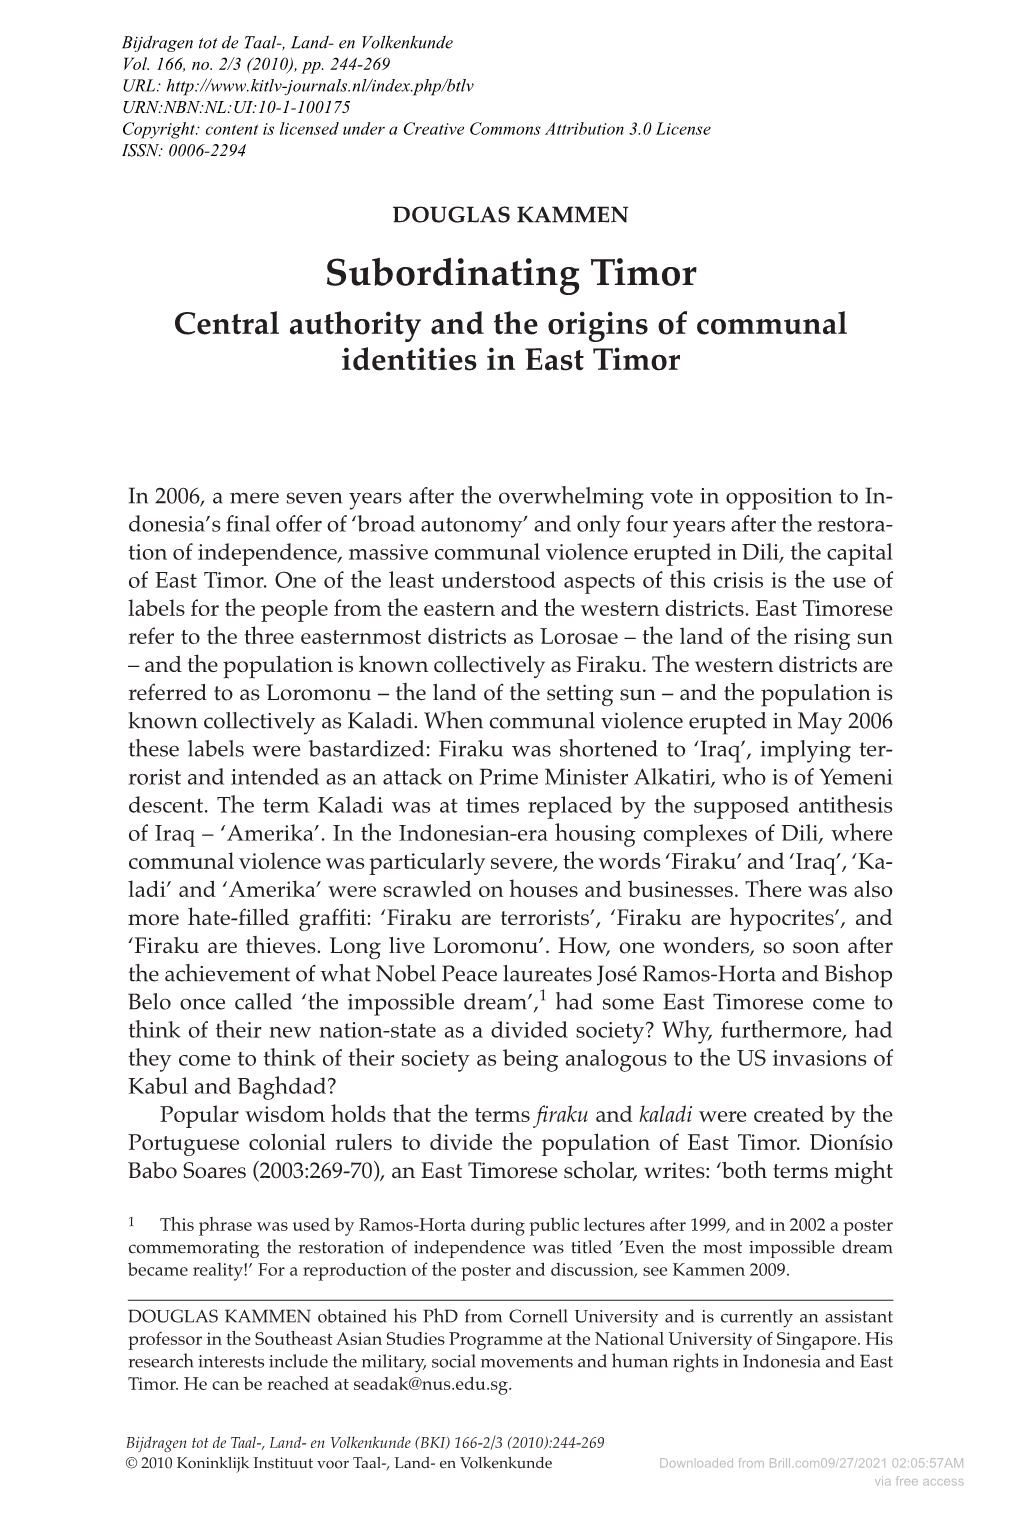 Subordinating Timor Central Authority and the Origins of Communal Identities in East Timor